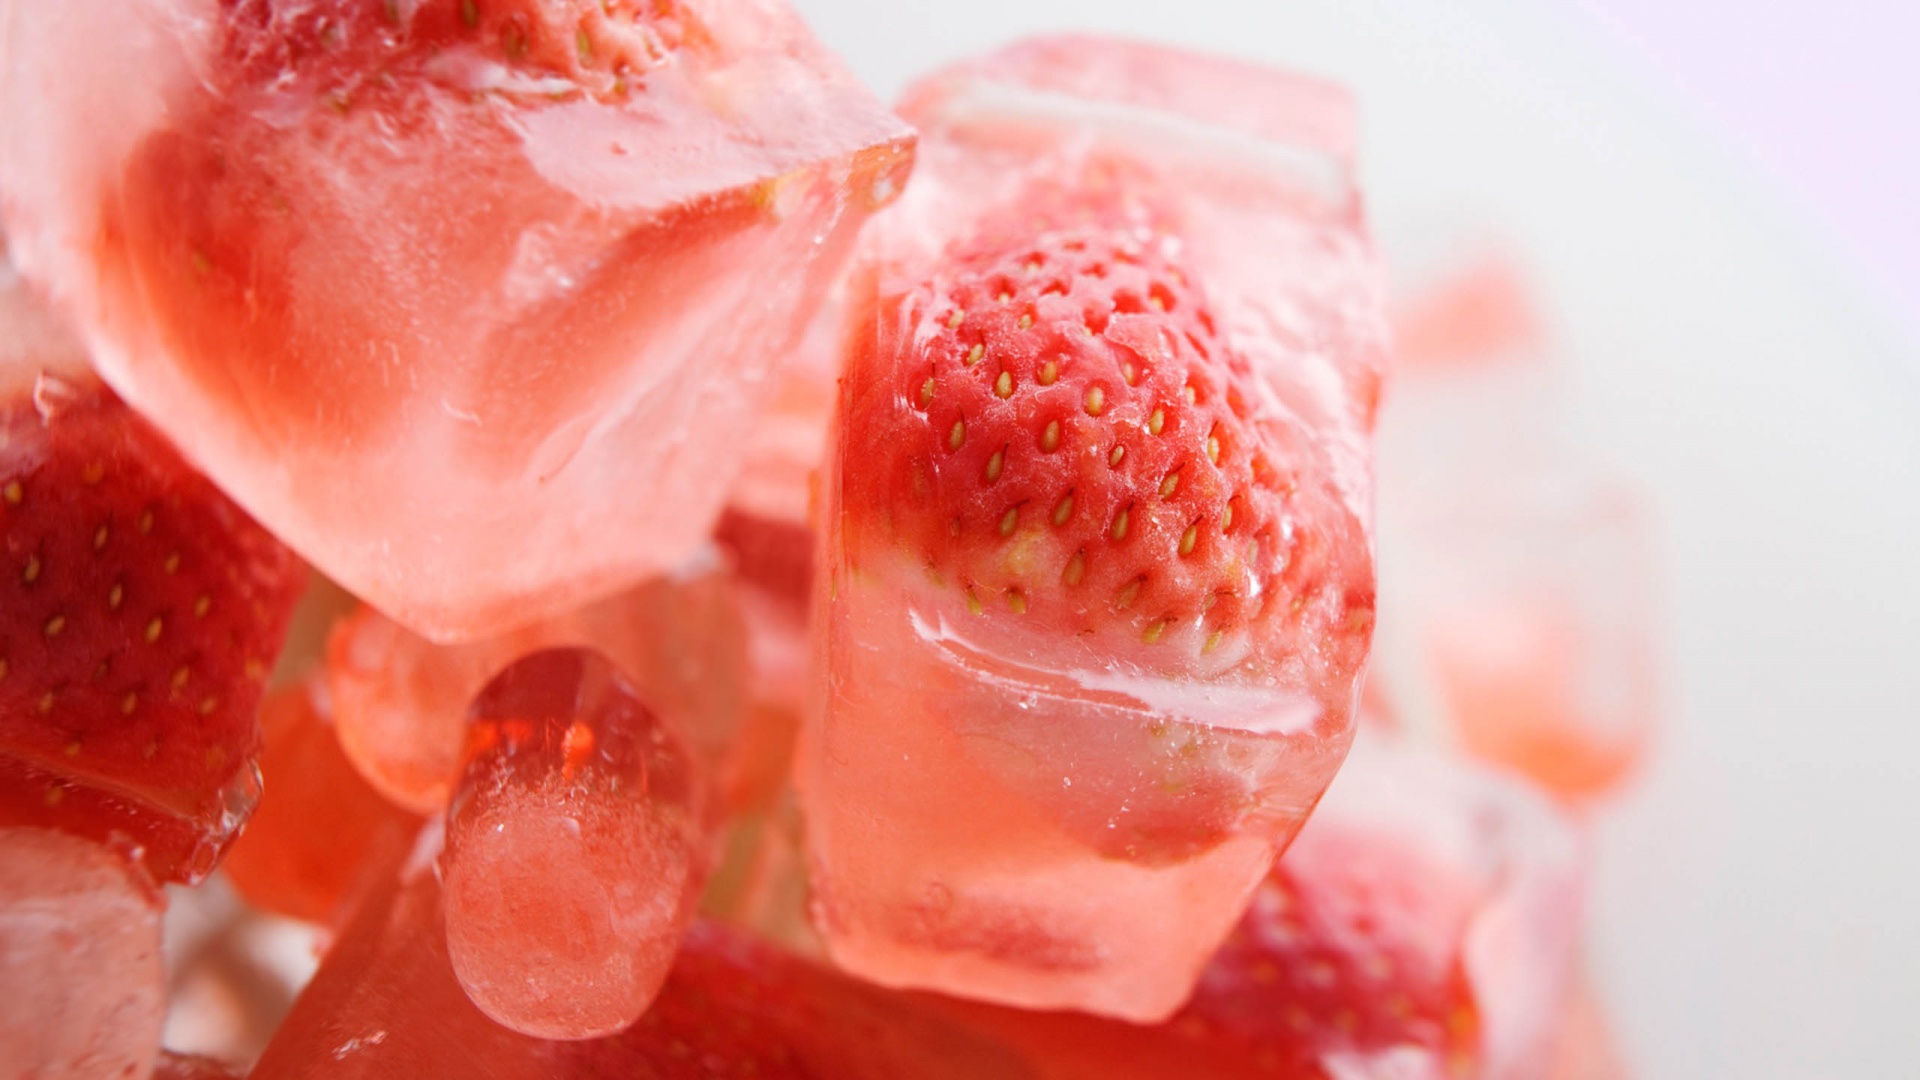 Strawberries On Ice Cubes